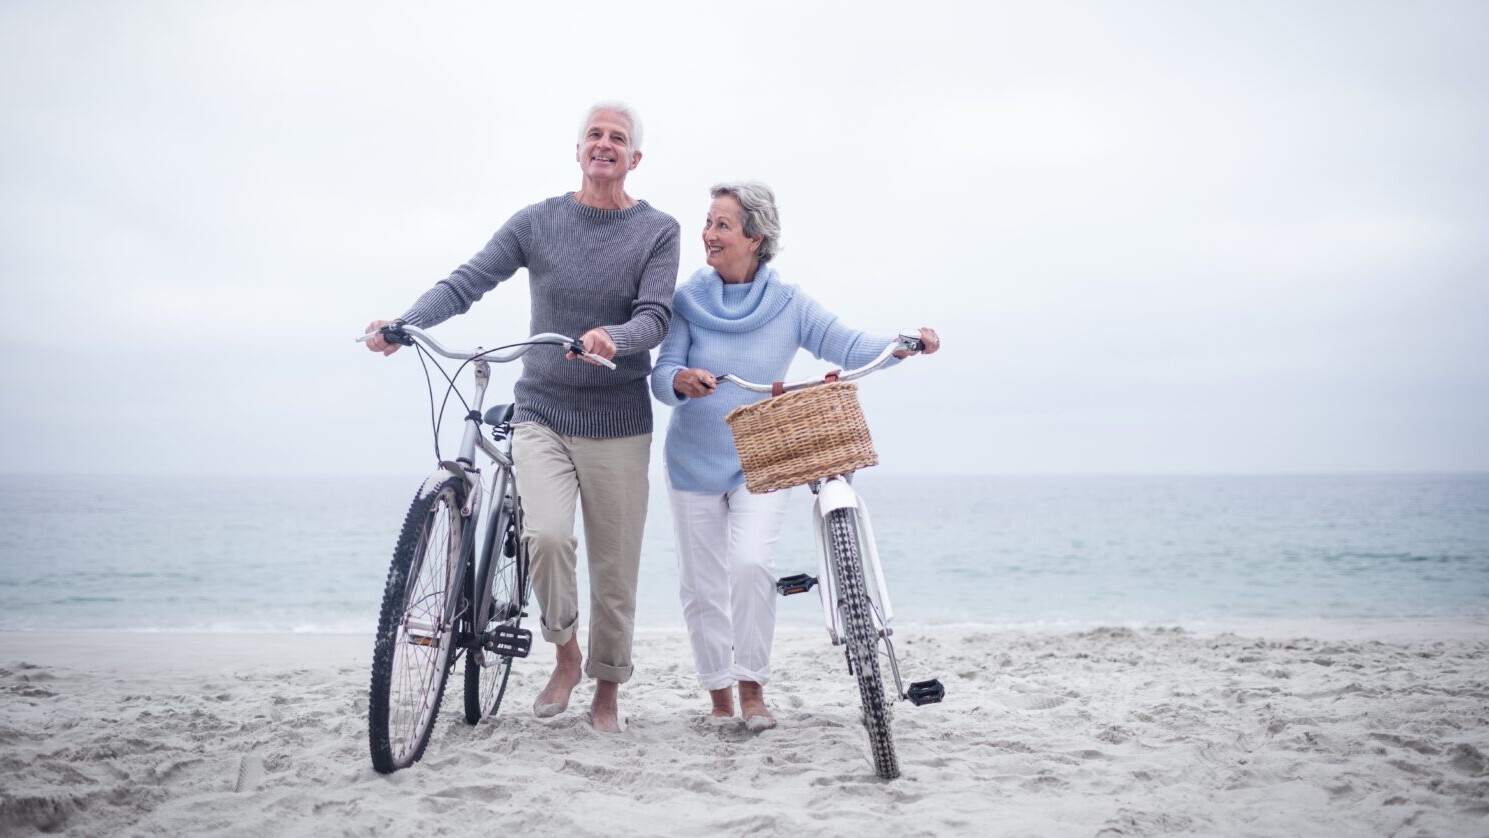 Older man and woman on the beach pushing bicycles.